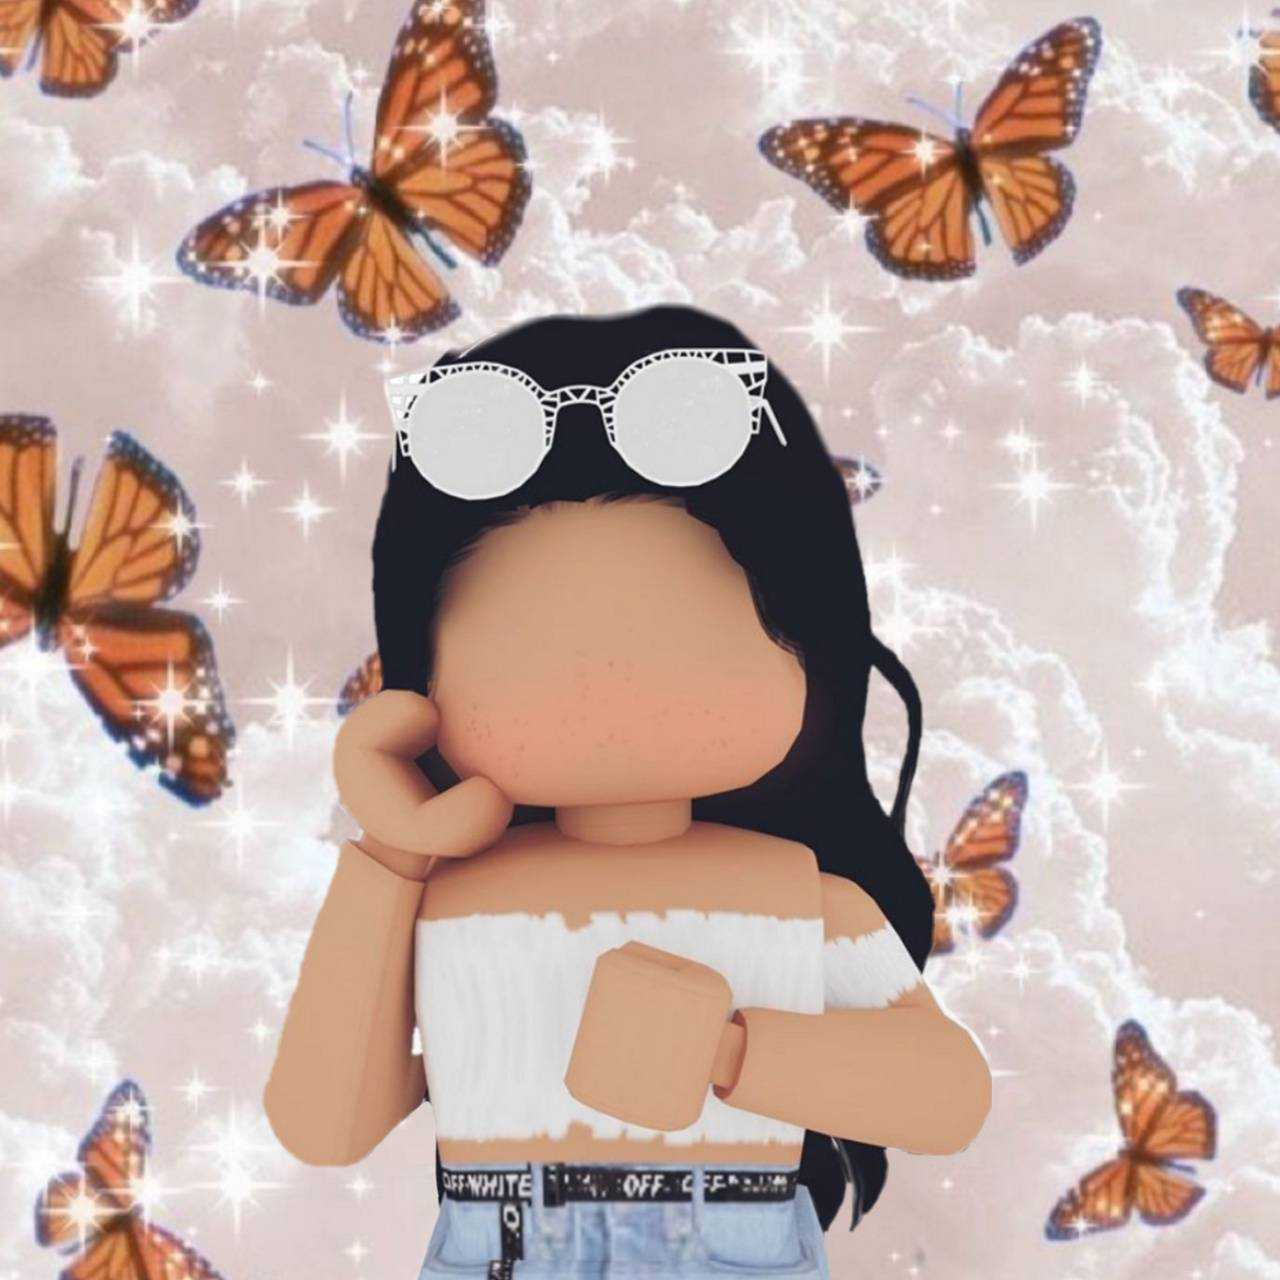 roblox wallpapers for girls｜TikTok Search